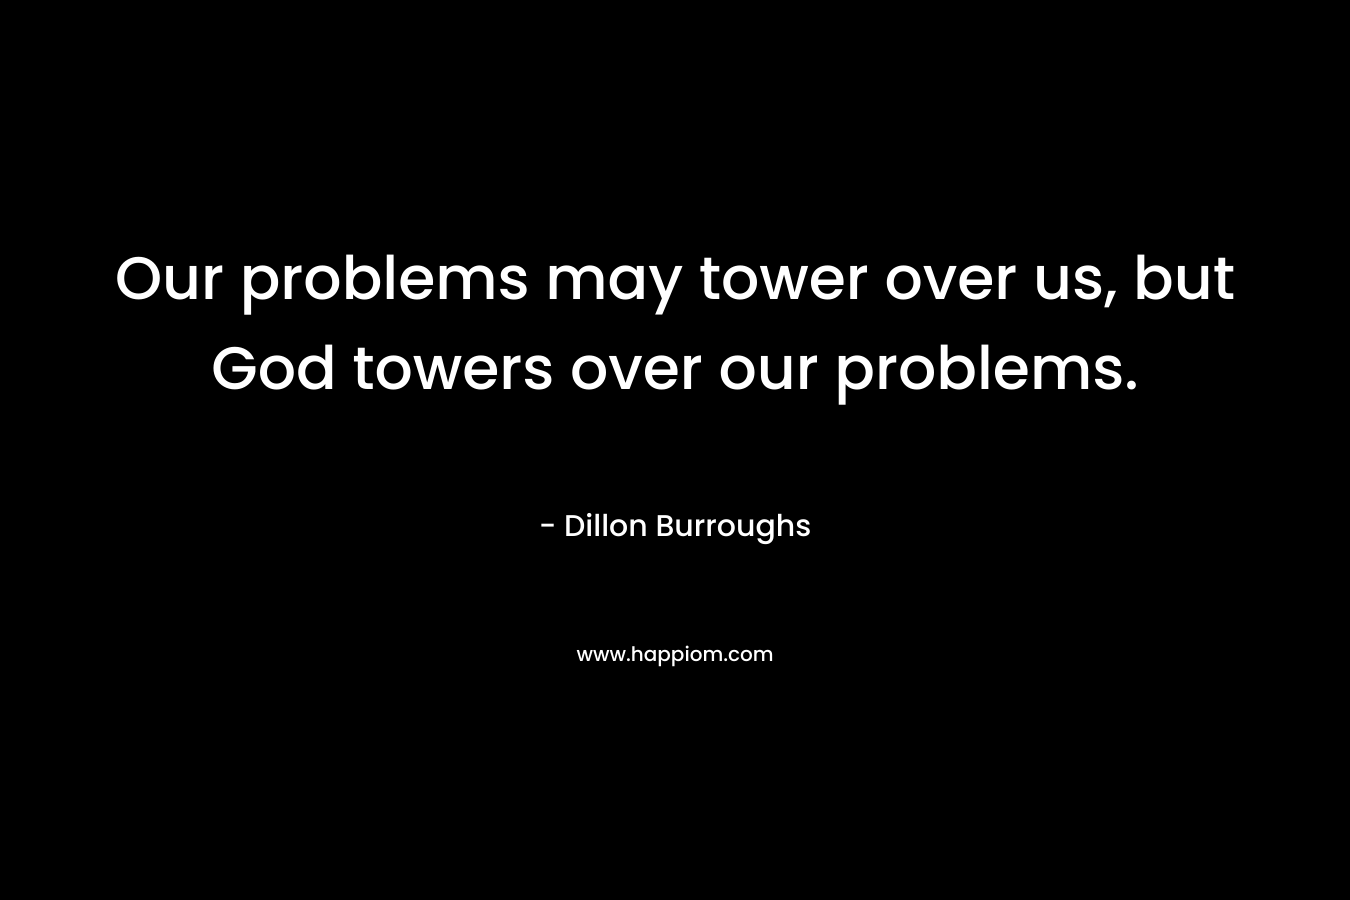 Our problems may tower over us, but God towers over our problems. – Dillon Burroughs